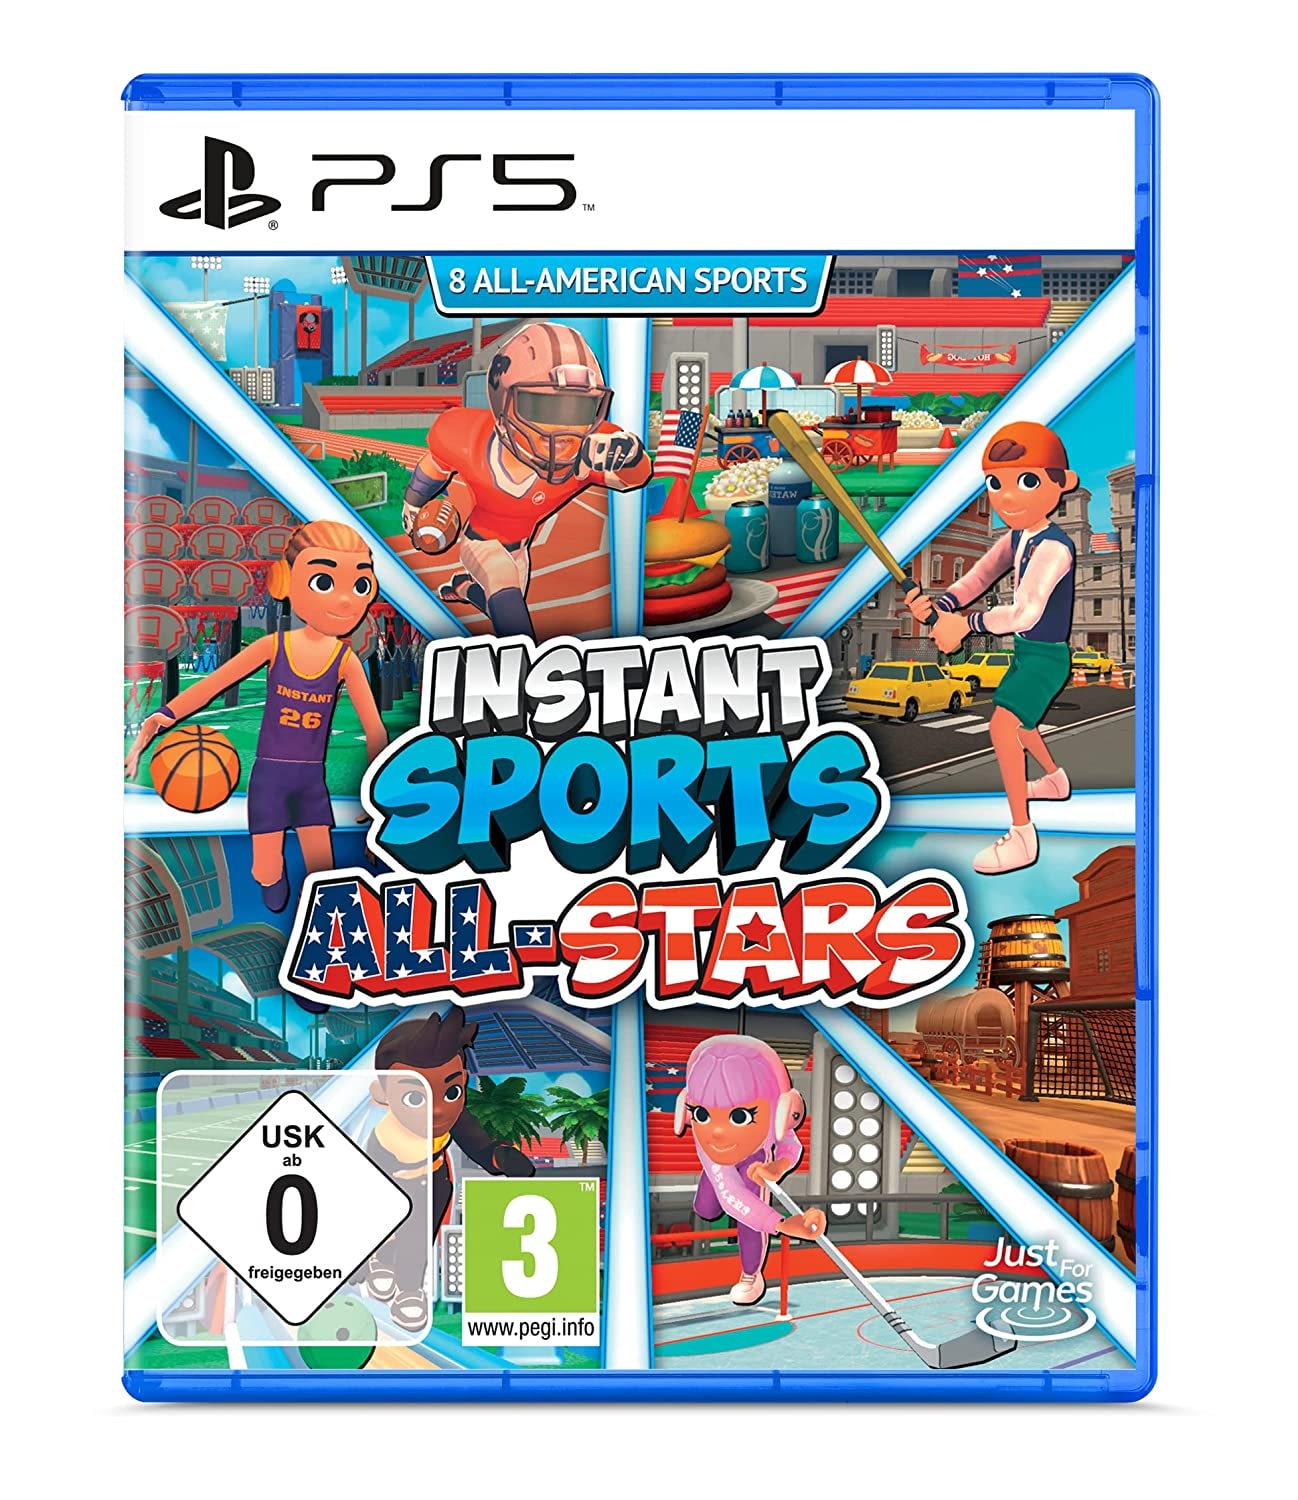 Spielesoftware Stars«, 5 All bei Sports Astragon PlayStation »Instant